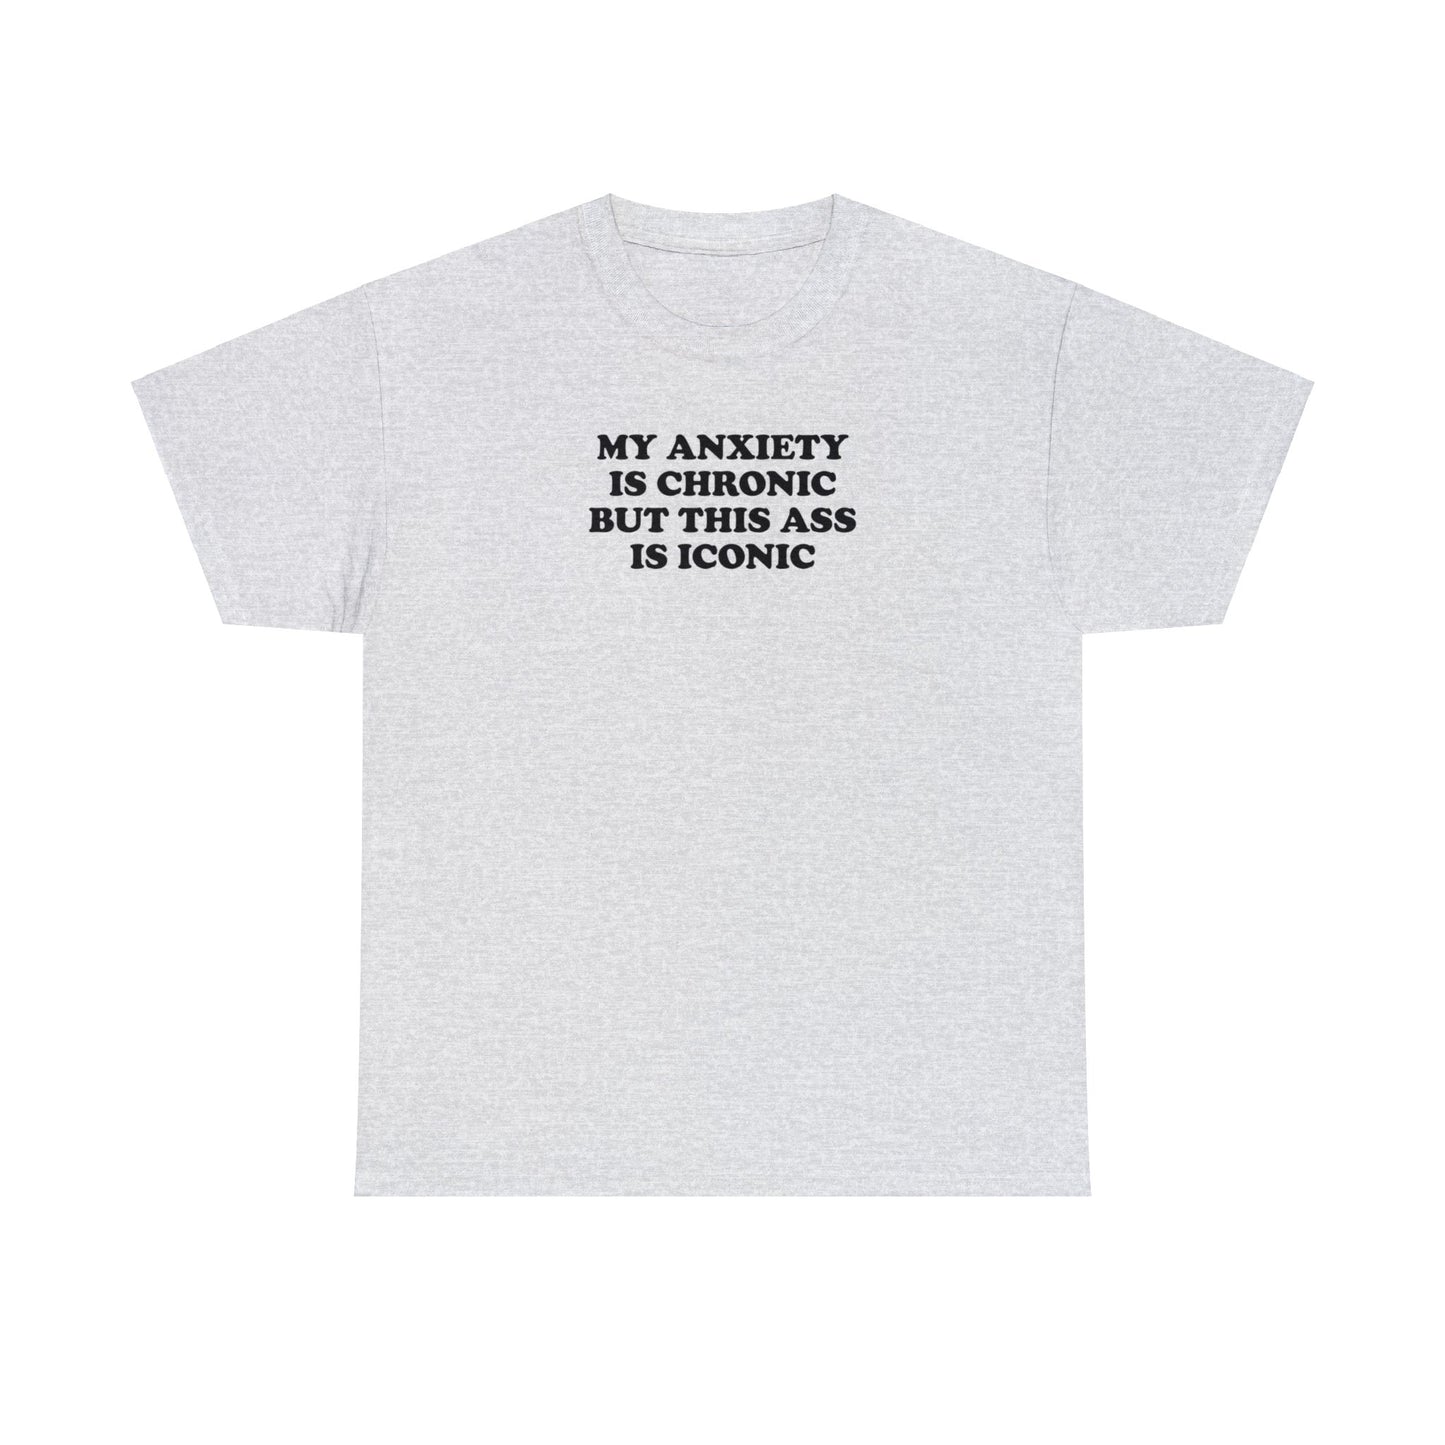 MY ANXIETY IS CHRONIC BUT THIS ASS IS ICONIC T-SHIRT